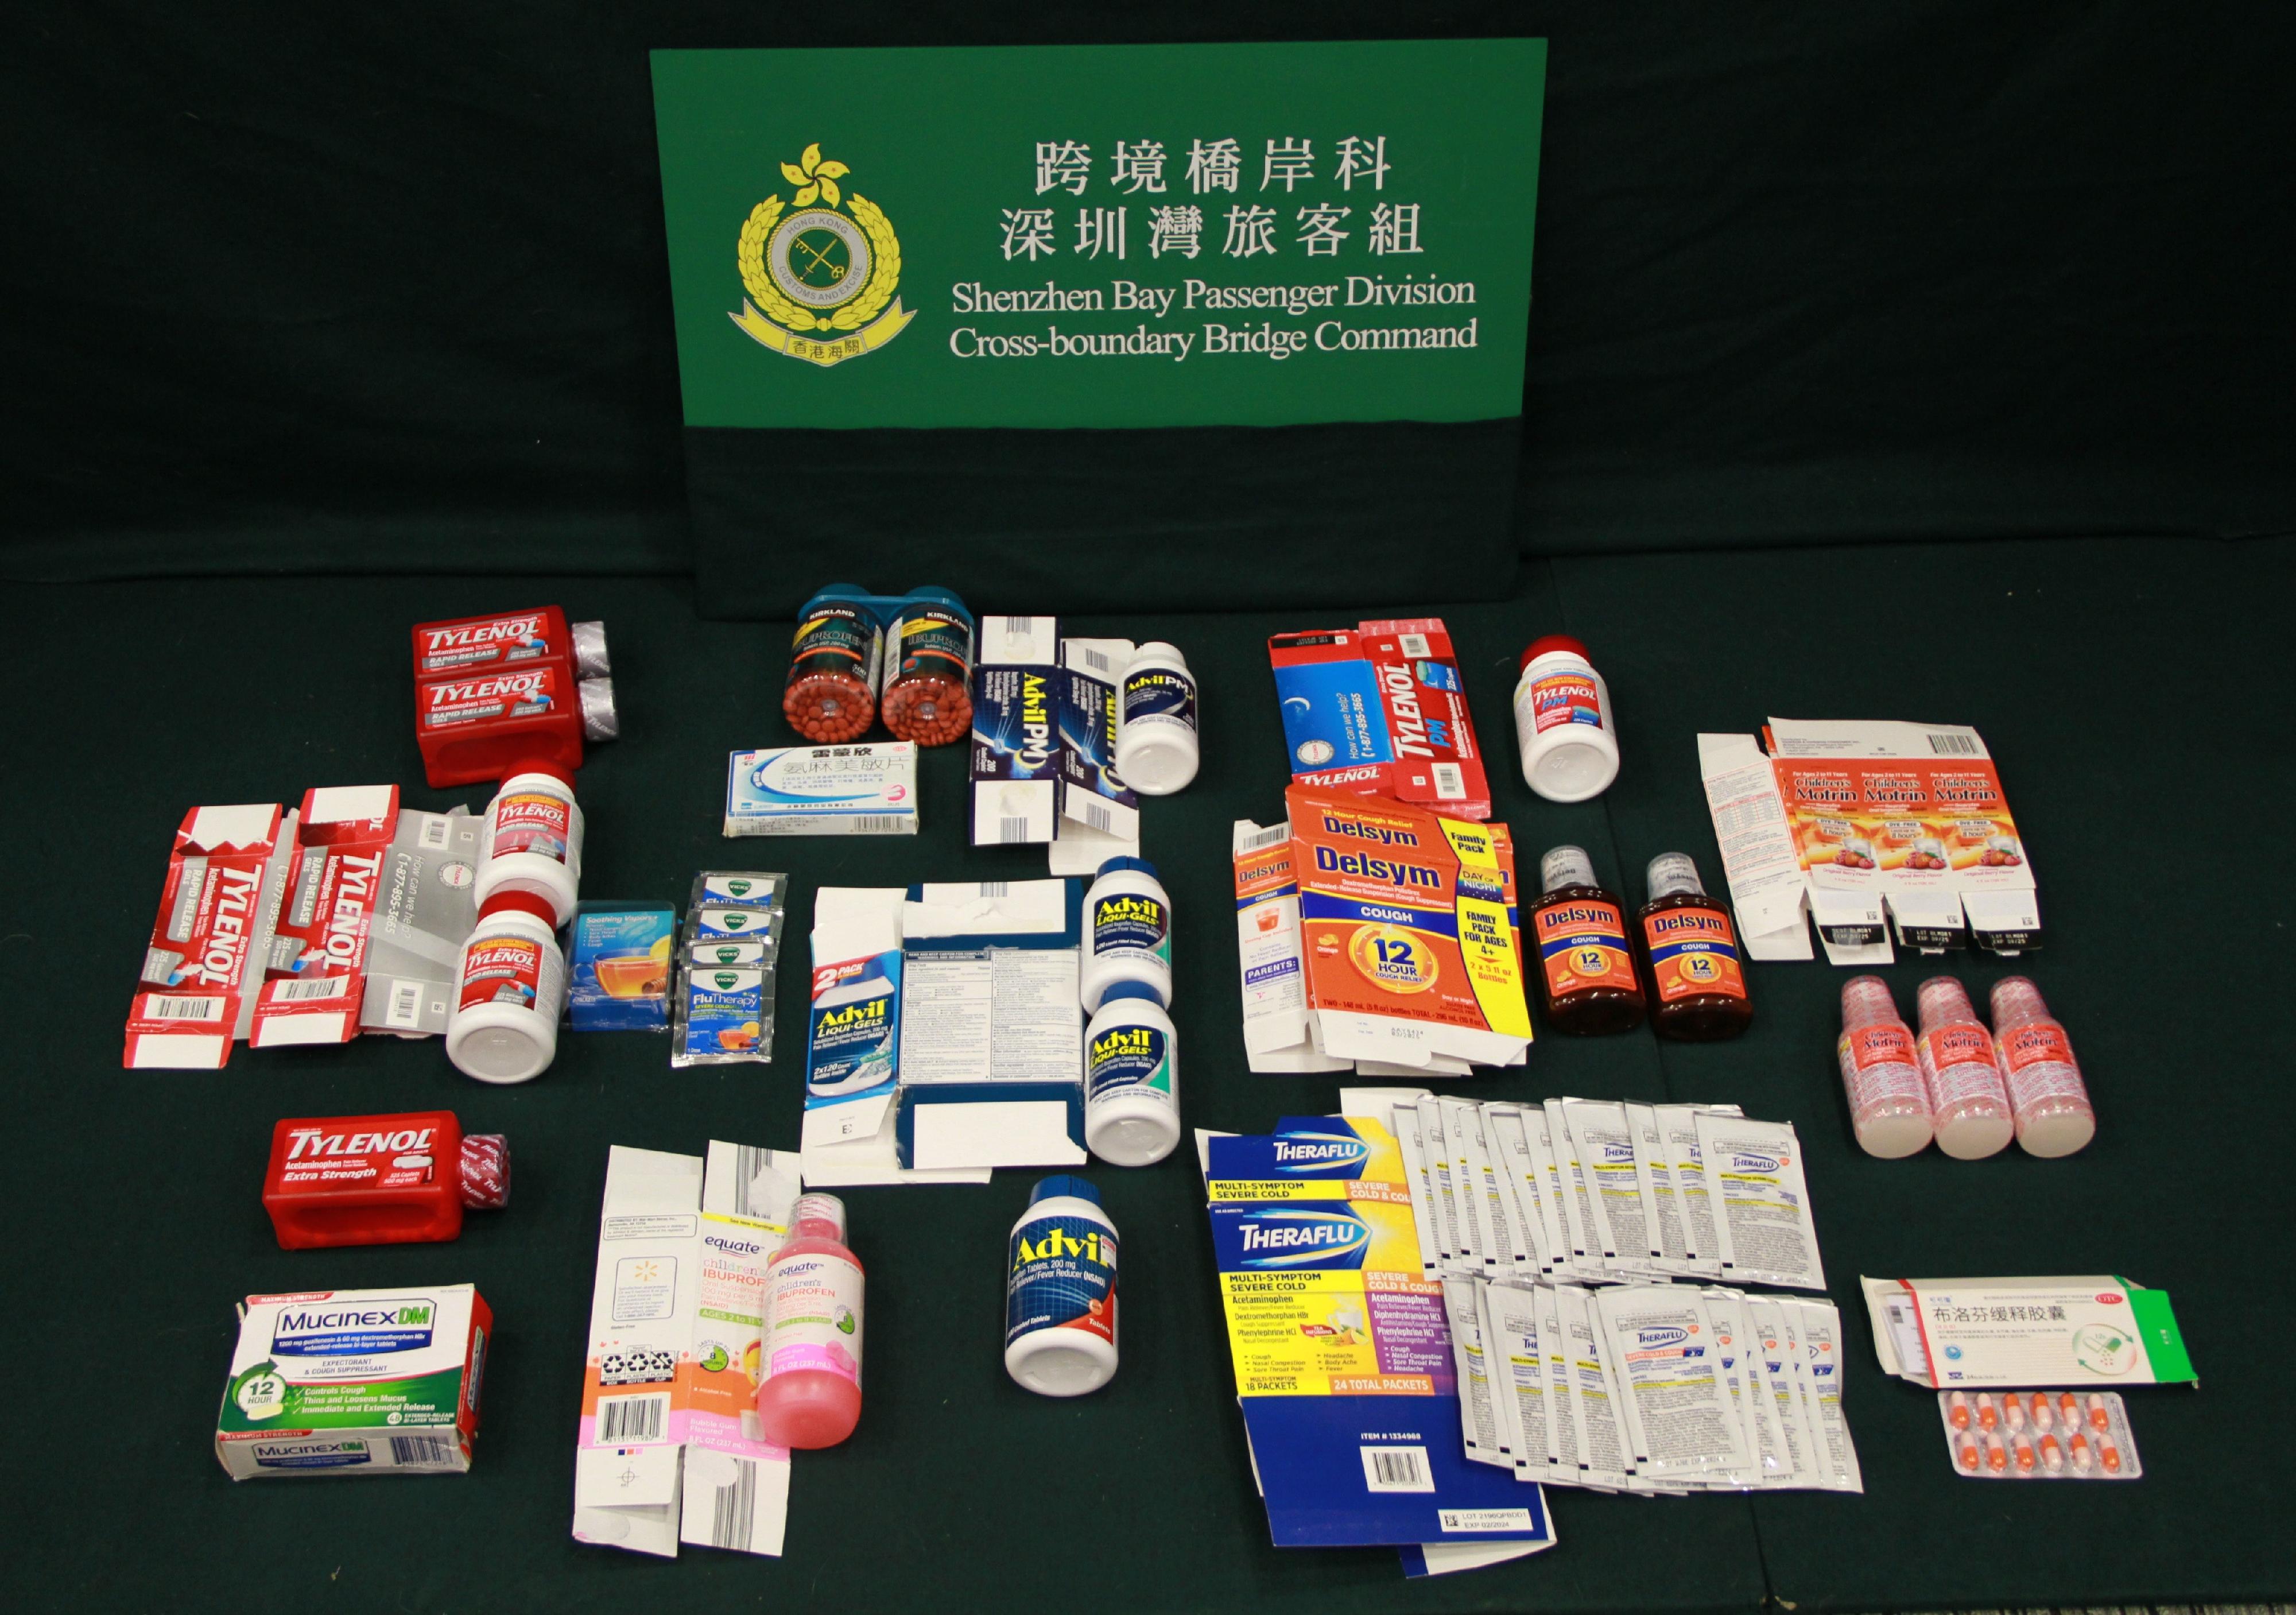 Hong Kong Customs yesterday (January 16) detected a suspected medicine smuggling case at Shenzhen Bay Control Point and seized about 3 400 tablets and about 900 millilitres of suspected controlled medicines with a total estimated market value of about $3,000. Photo shows some of the suspected controlled medicines seized, mainly including pain and fever relief medicines containing paracetamol or ibuprofen.
